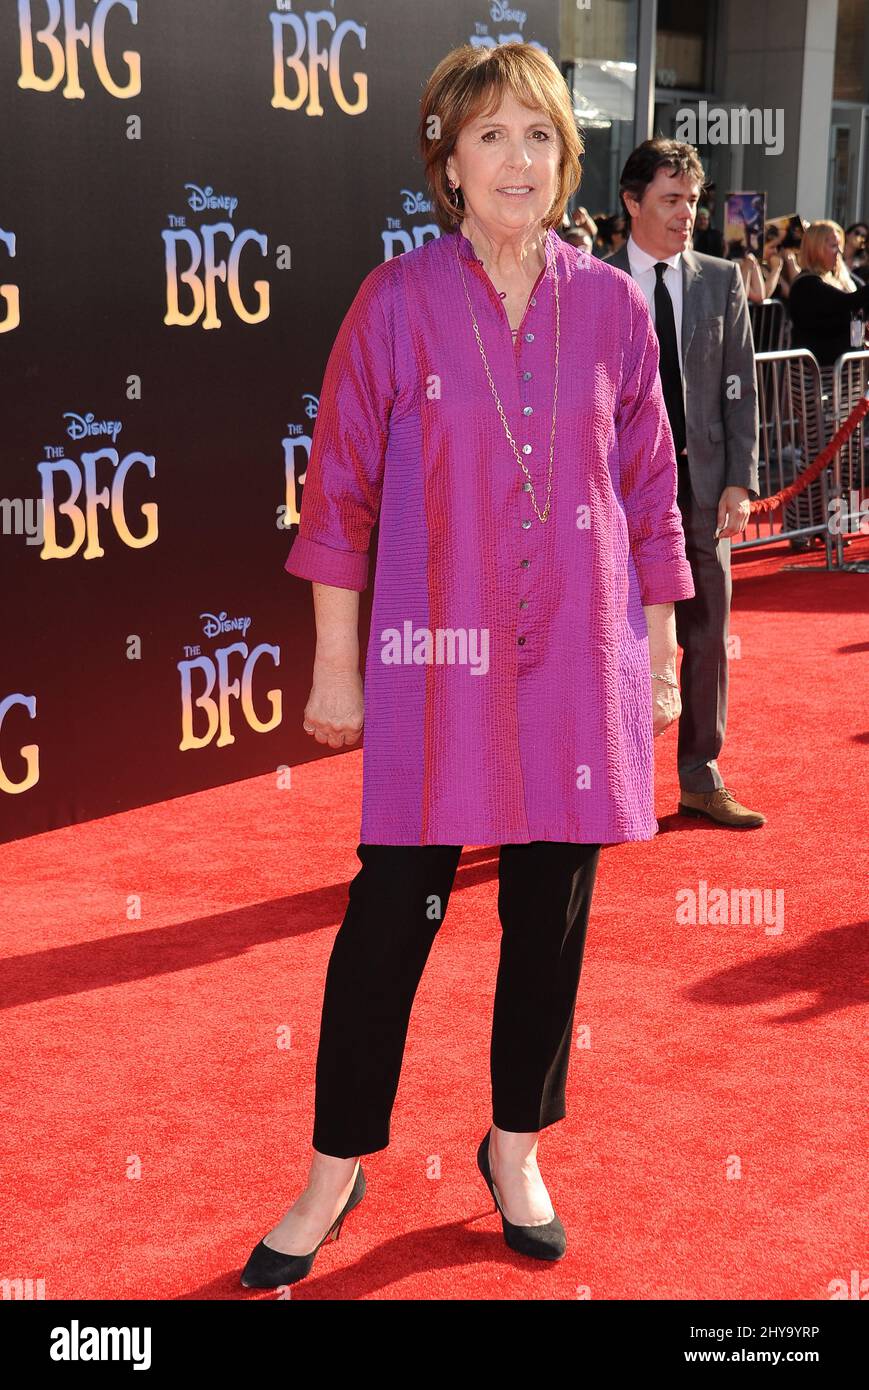 Penelope Wilton attending the premiere of 'The BFG' in Los Angeles. Stock Photo